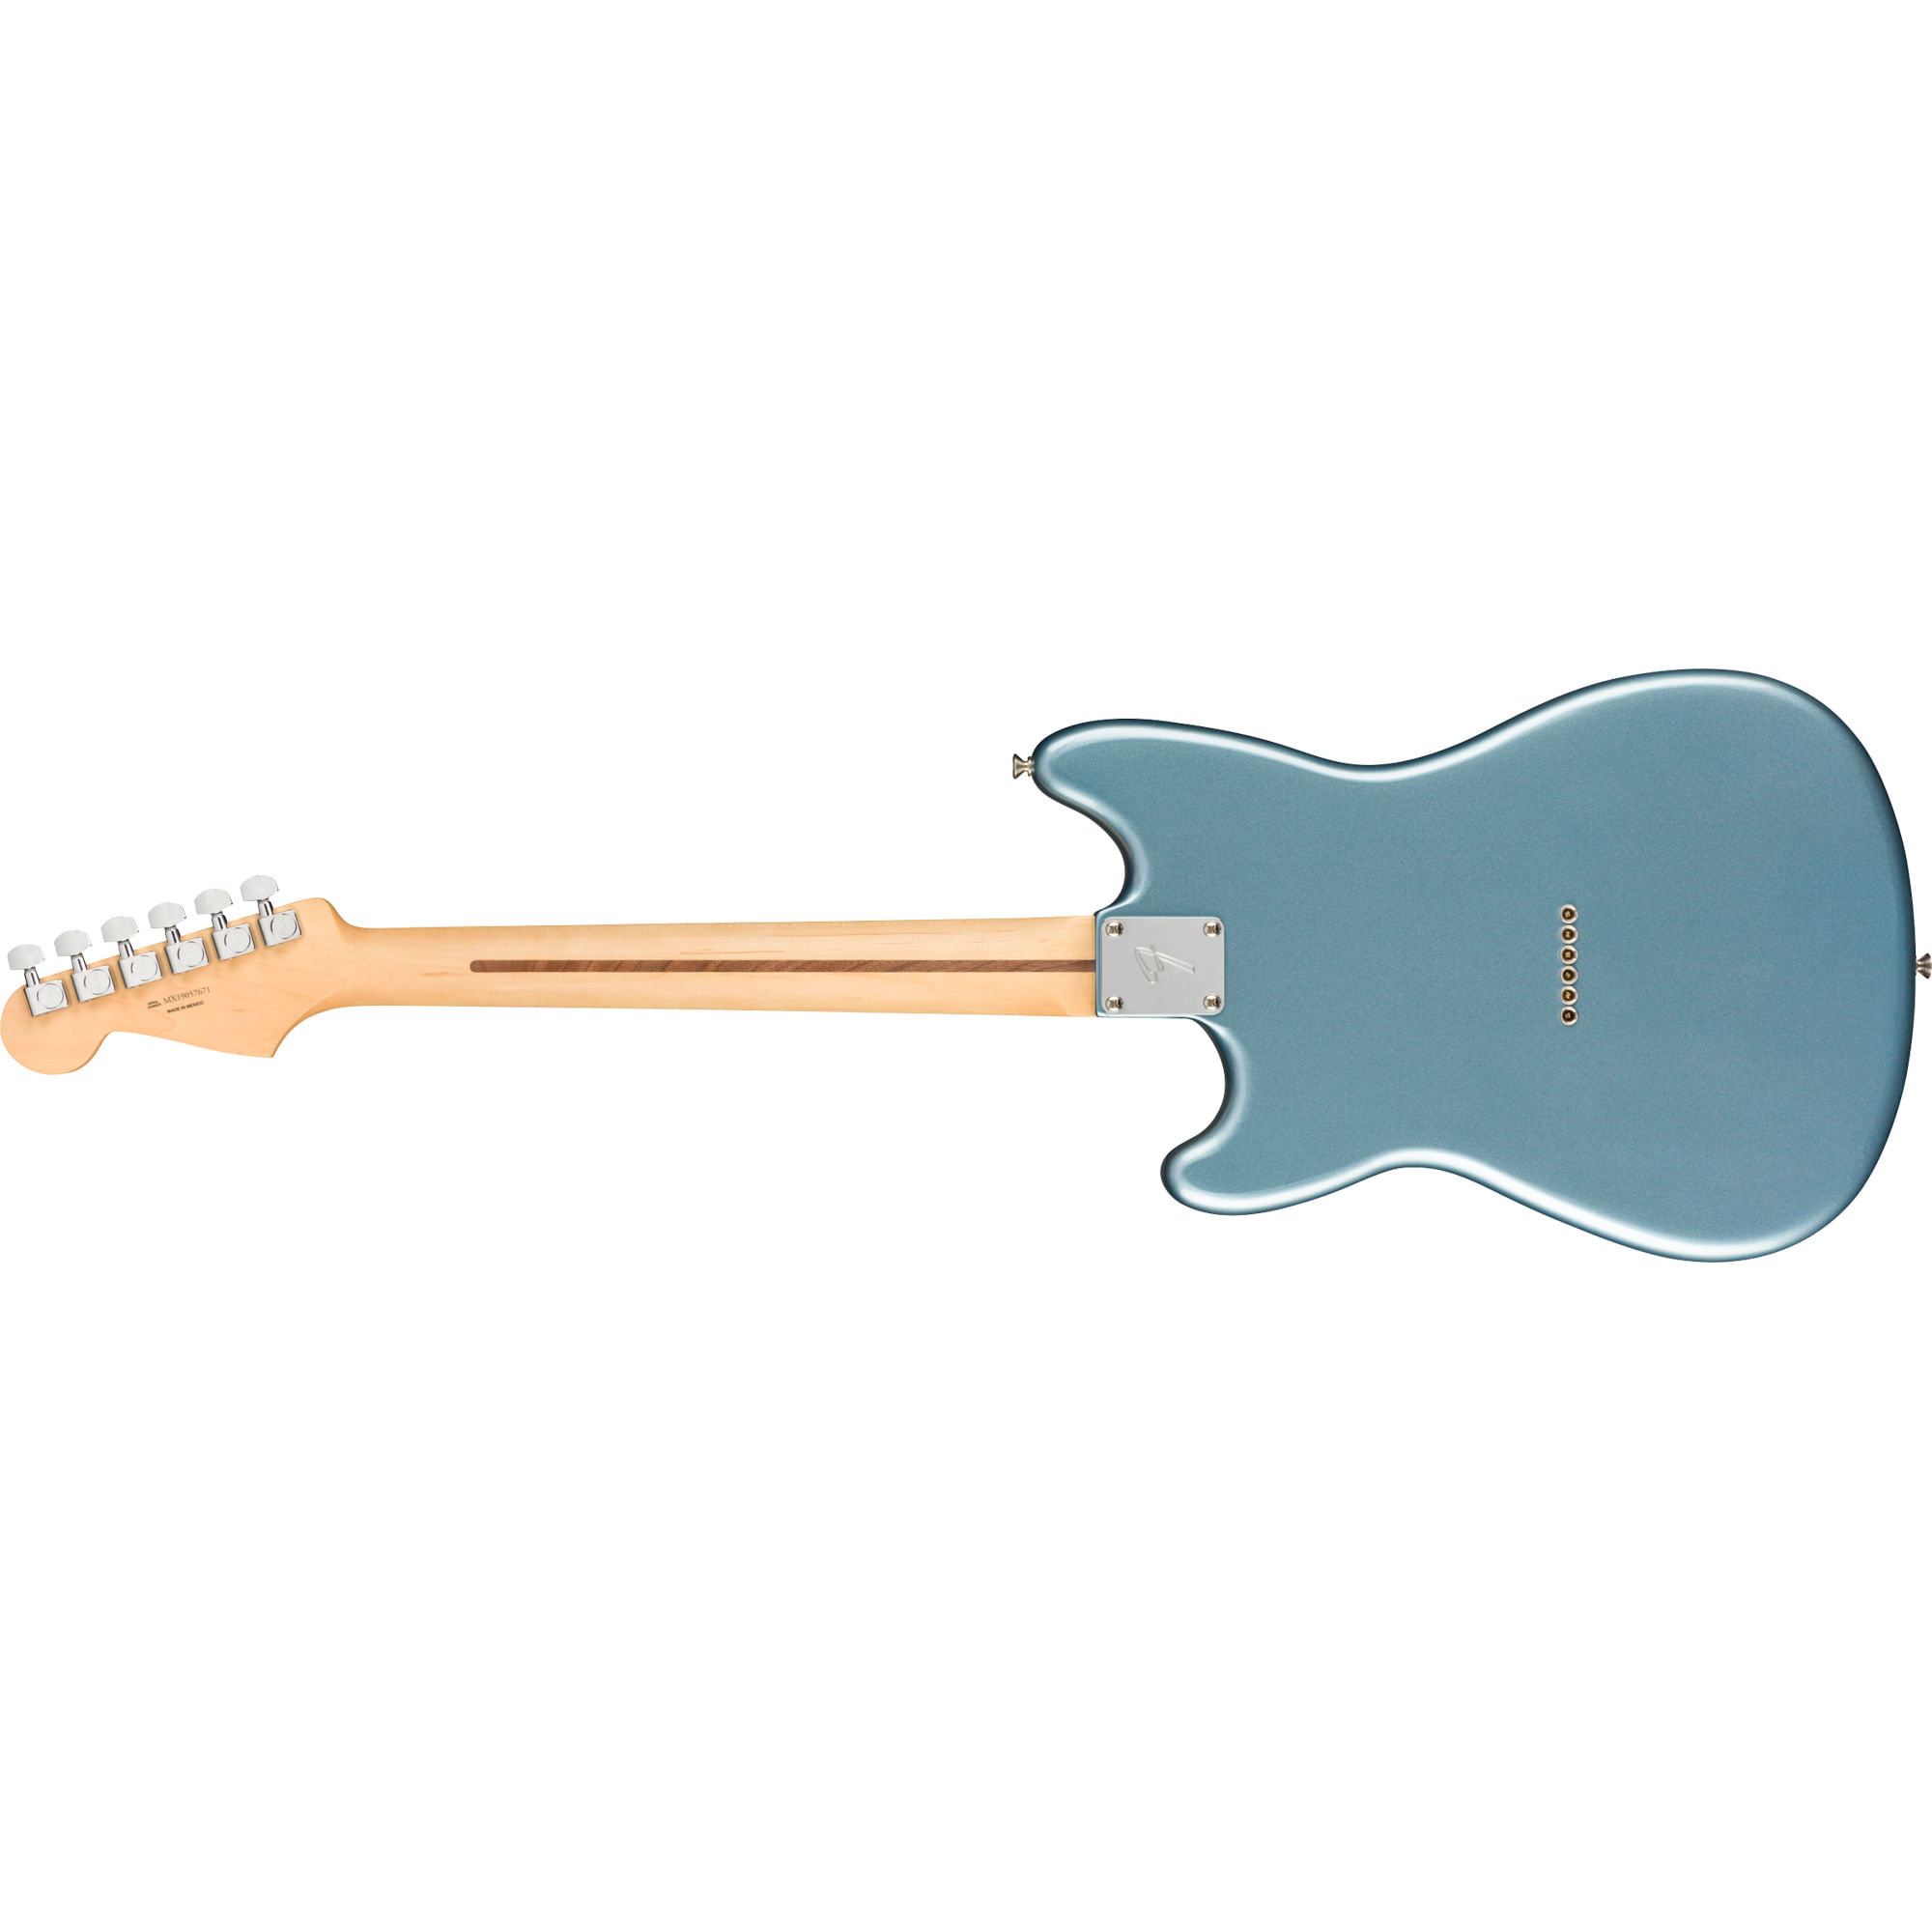 Fender Player Duo-Sonic HS Electric Guitar - Ice Blue Metallic - Cosmo  Music | Canada's #1 Music Store - Shop, Rent, Repair